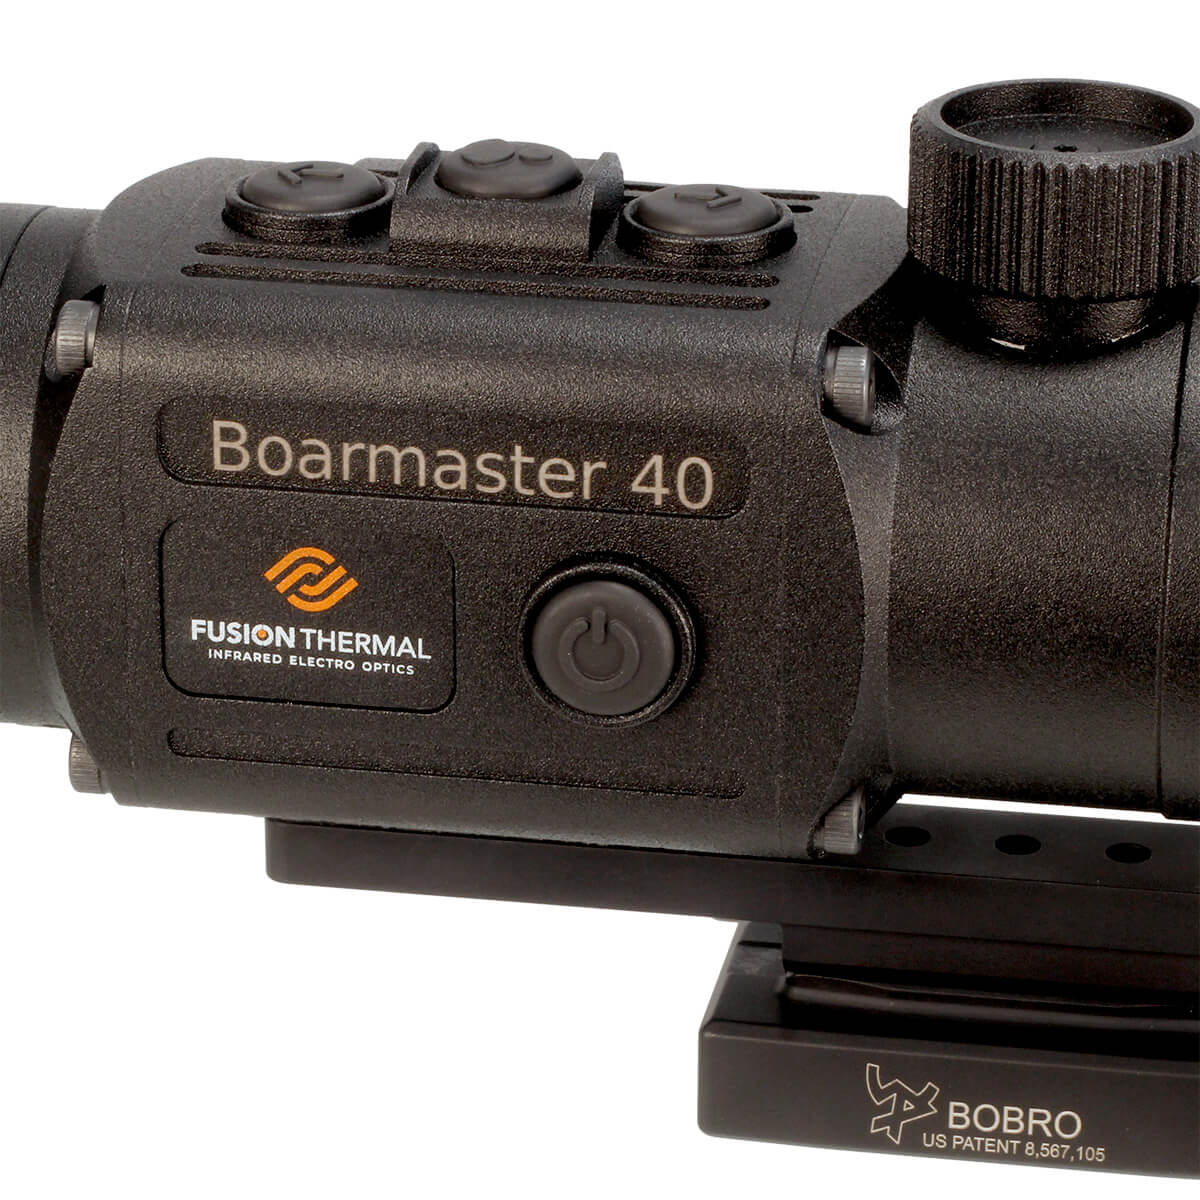 Thermal Scope | Thermal Scope Boarmaster 40 | TS100